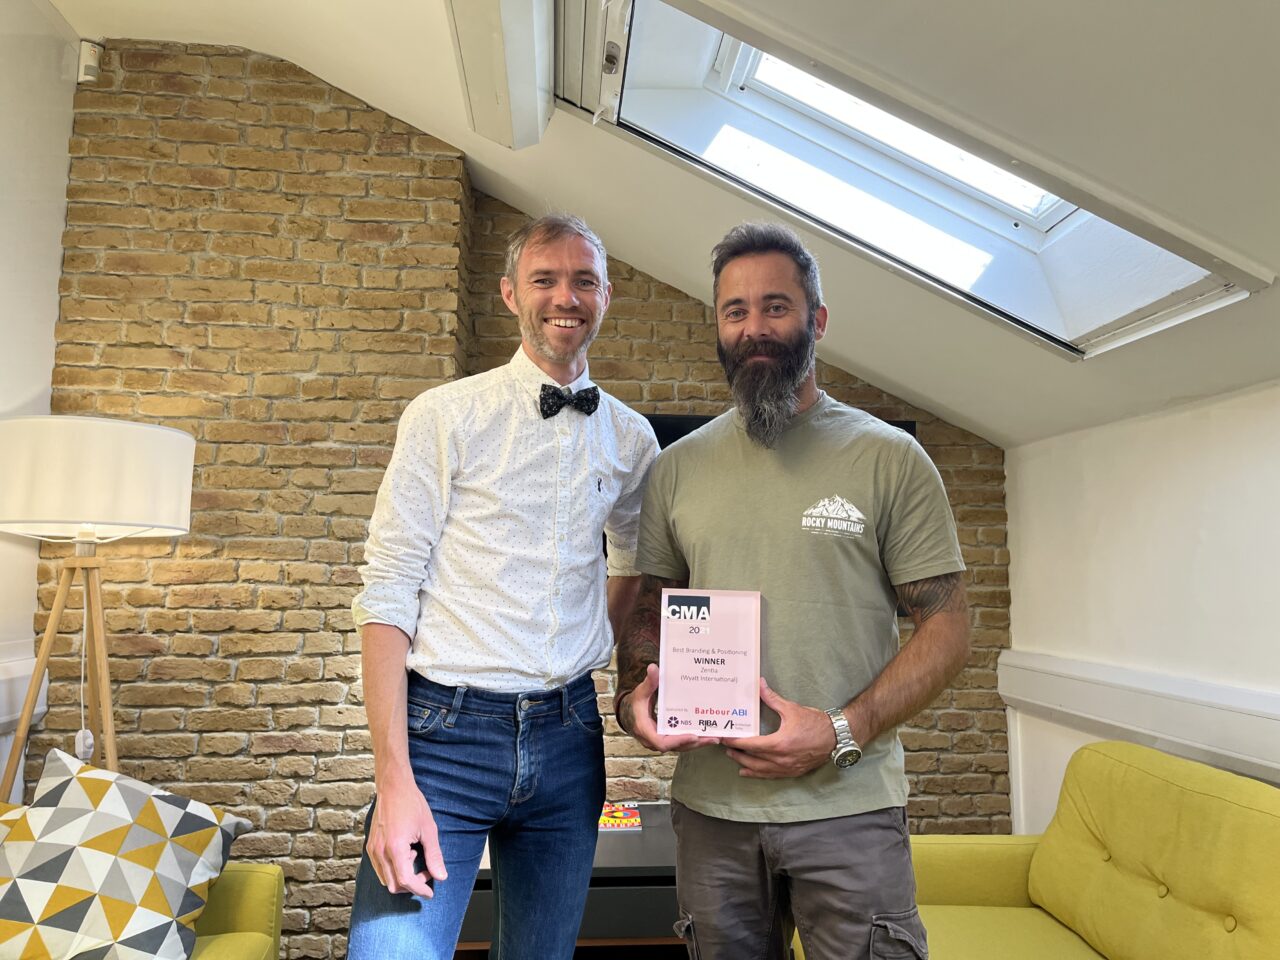 Simon Hall, Brand and Strategy Director, and Mark Fletcher, Senior Designer both standing and smiling in an office holding a CMA award